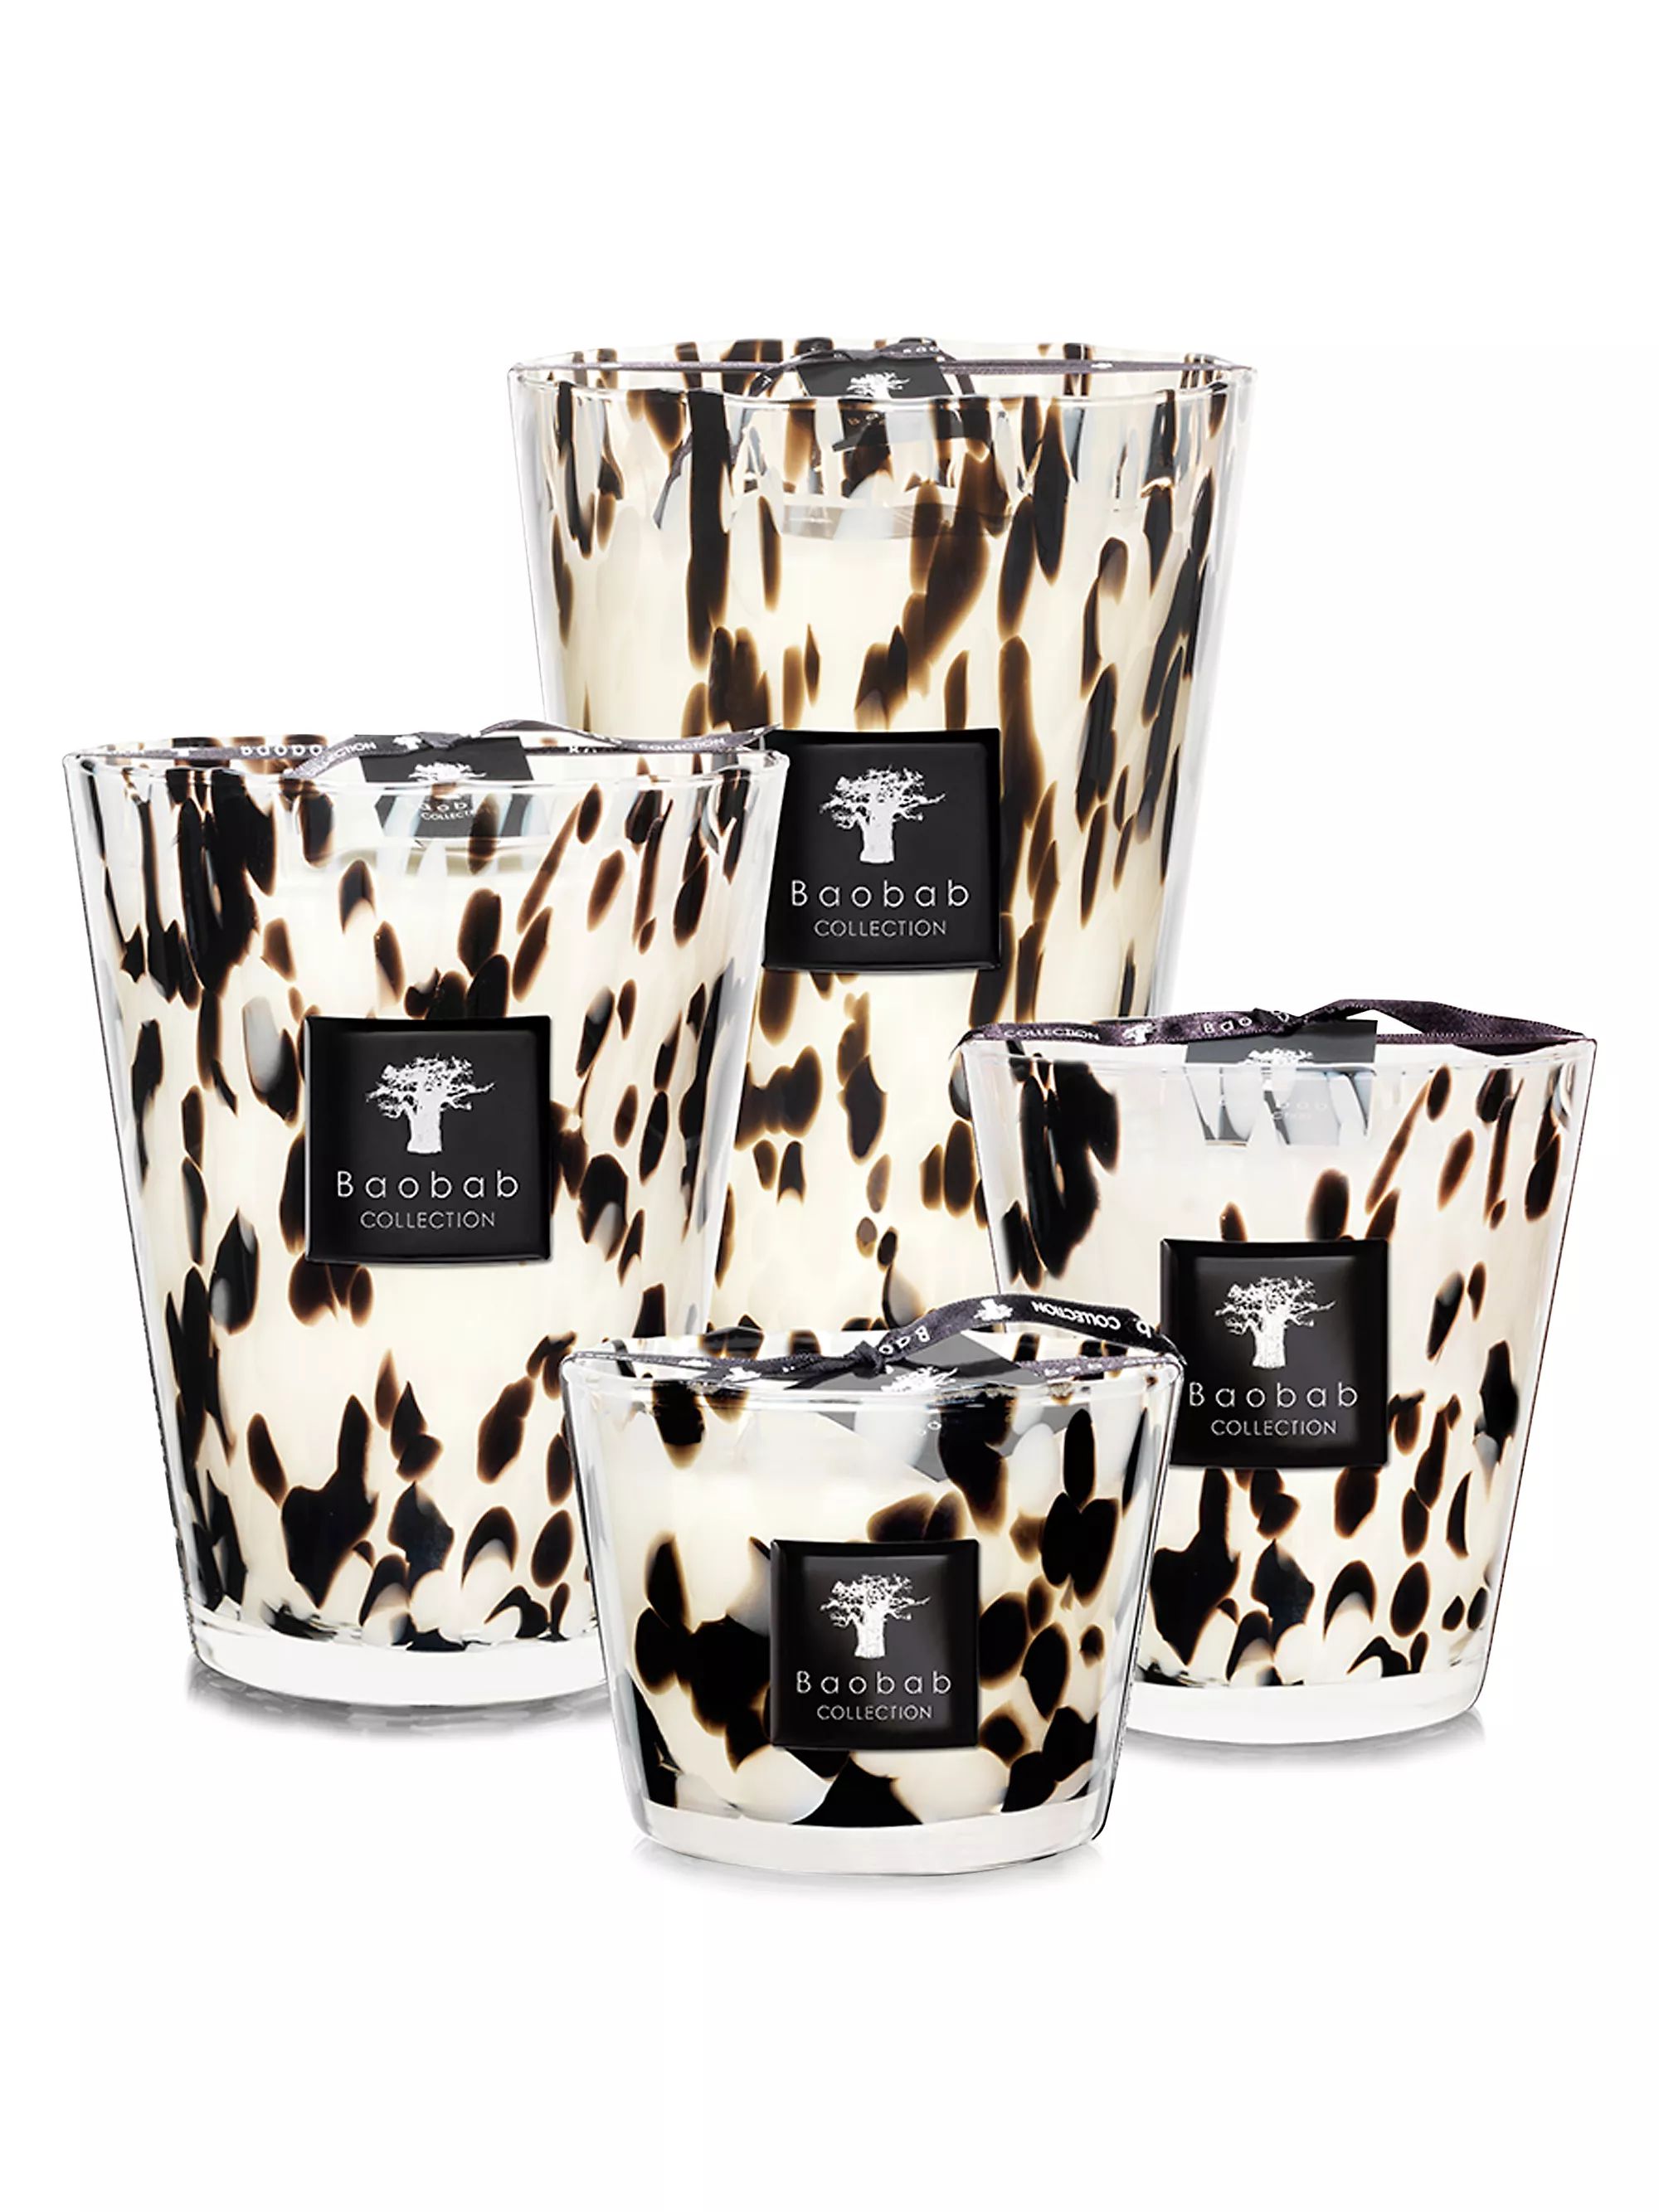 Pearls Max24 Black Candle | Saks Fifth Avenue